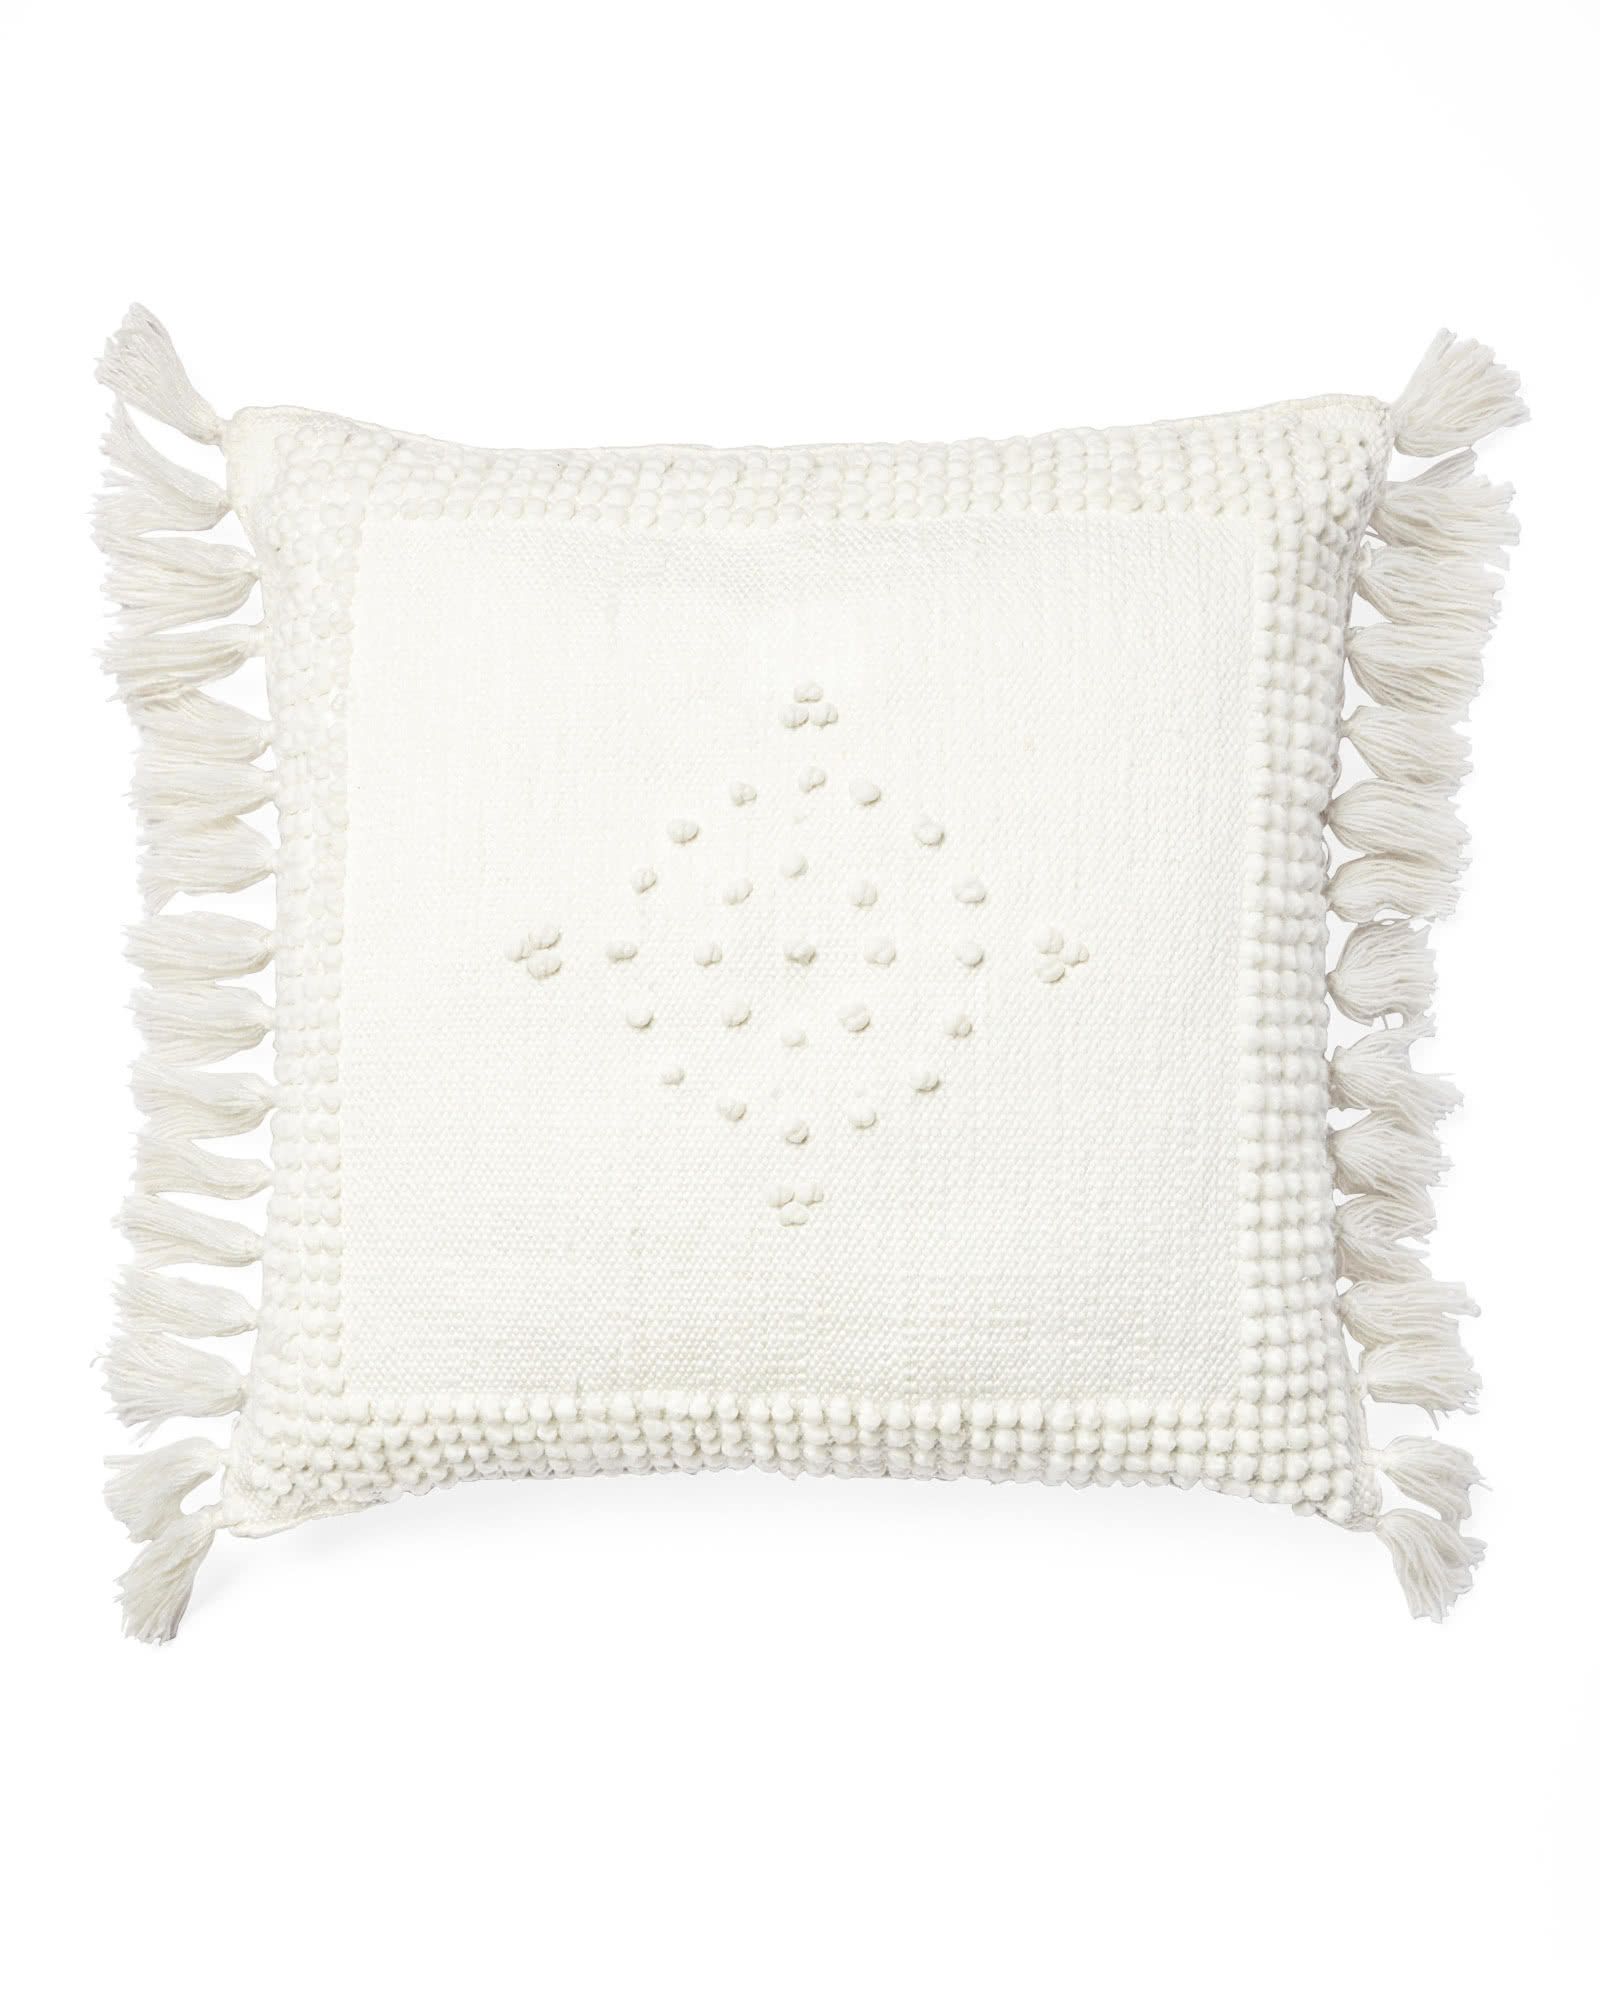 Montecito Pillow Cover
        D10S-OP37-2222 | Serena and Lily